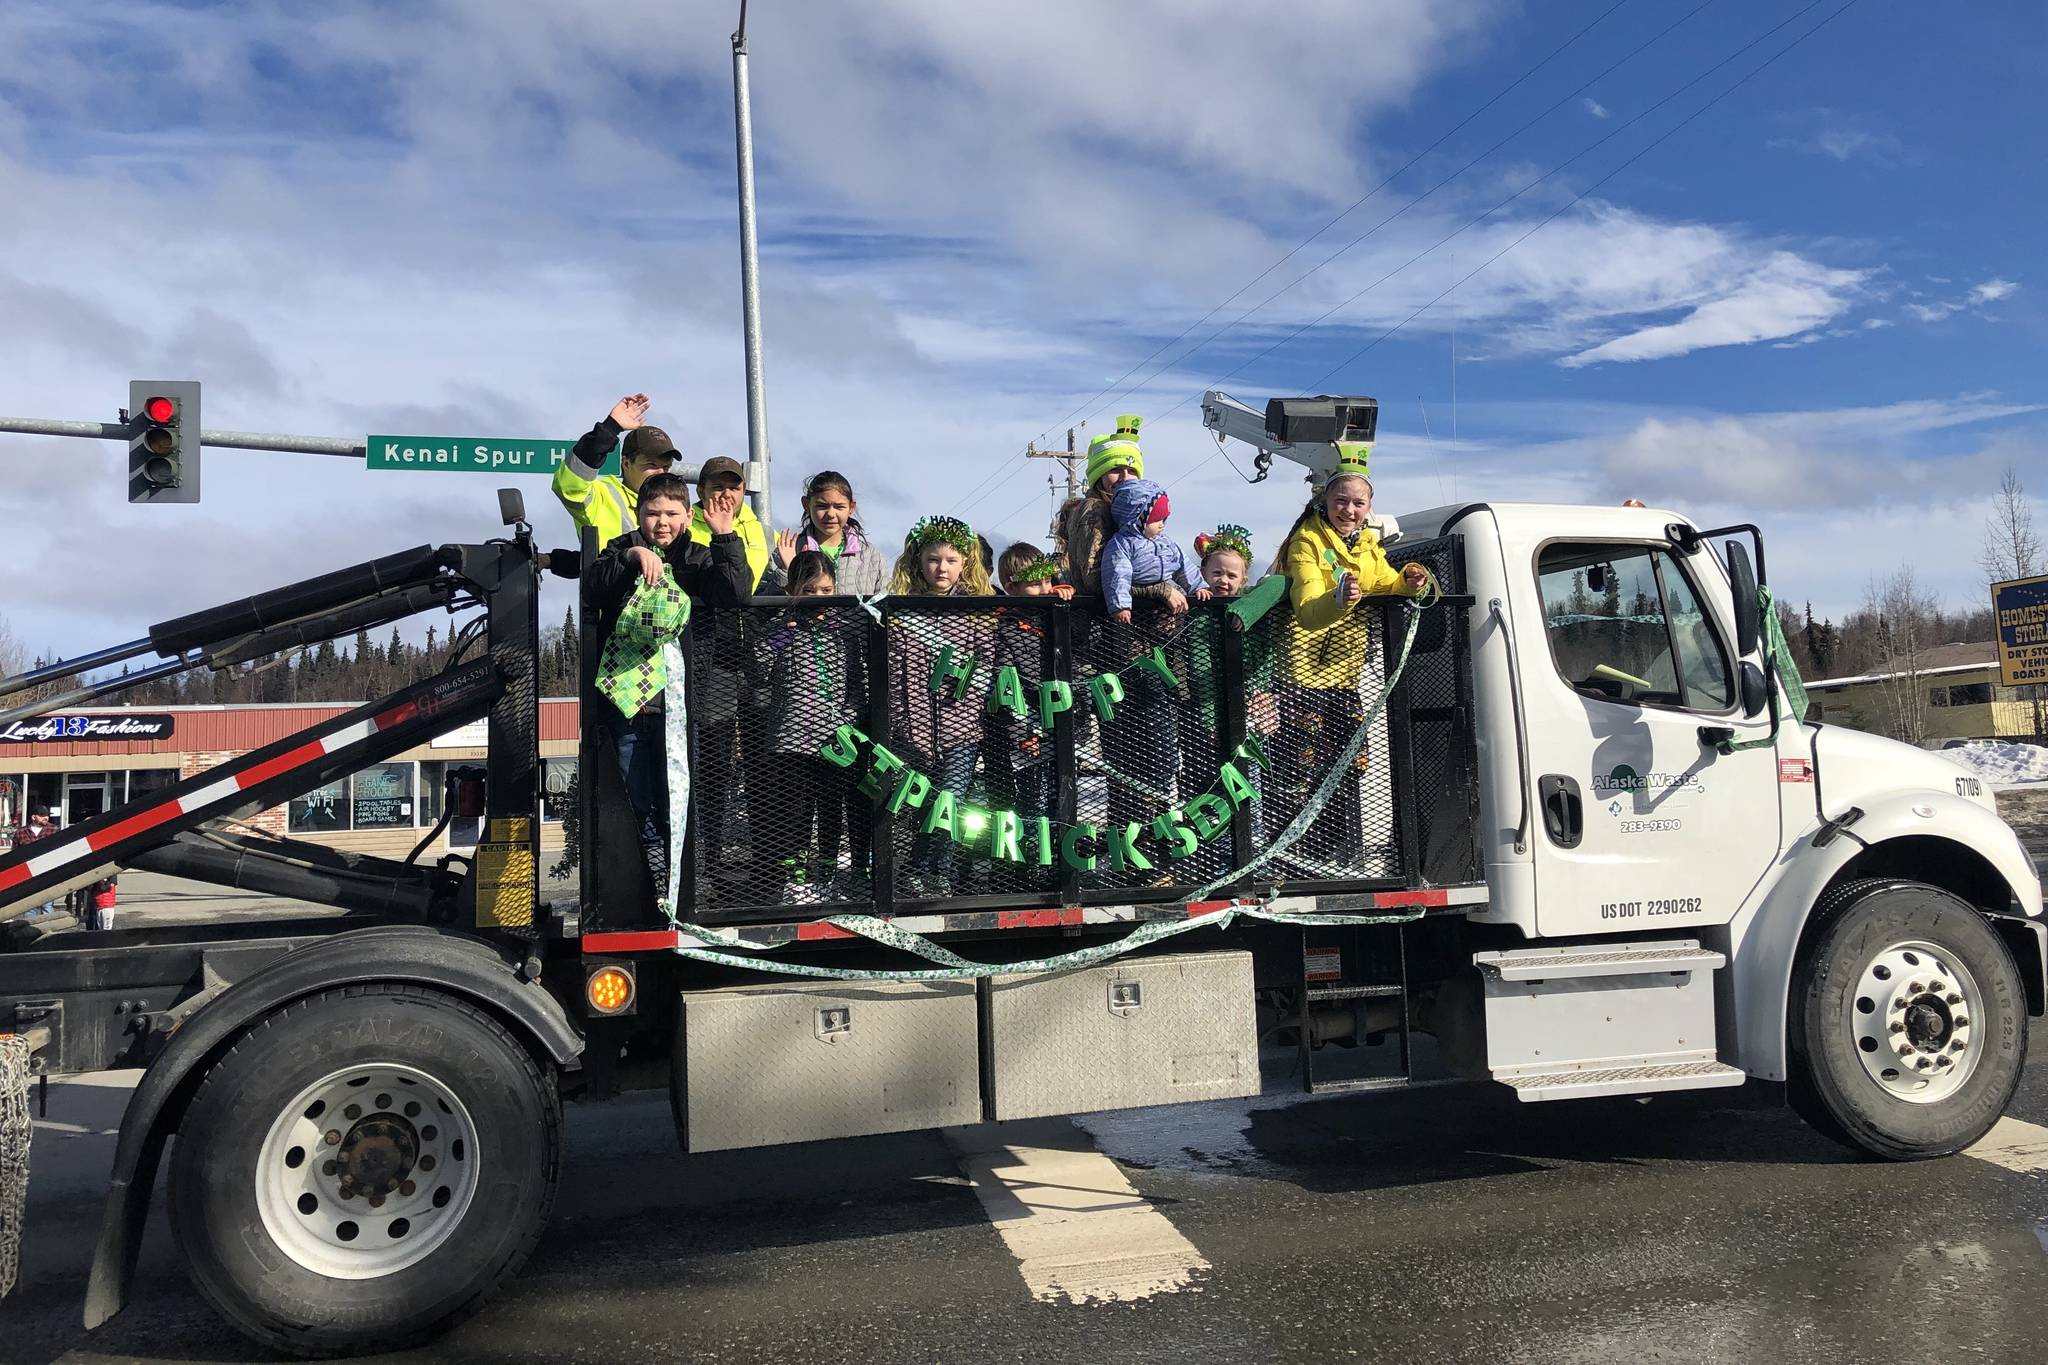 Residents in the parade wave to passerbys at the 28th annual Soldotna St. Patrick’s Day Parade on March, 17, 2019, in Soldotna, Alaska. (Photo by Victoria Petersen/Peninsula Clarion)